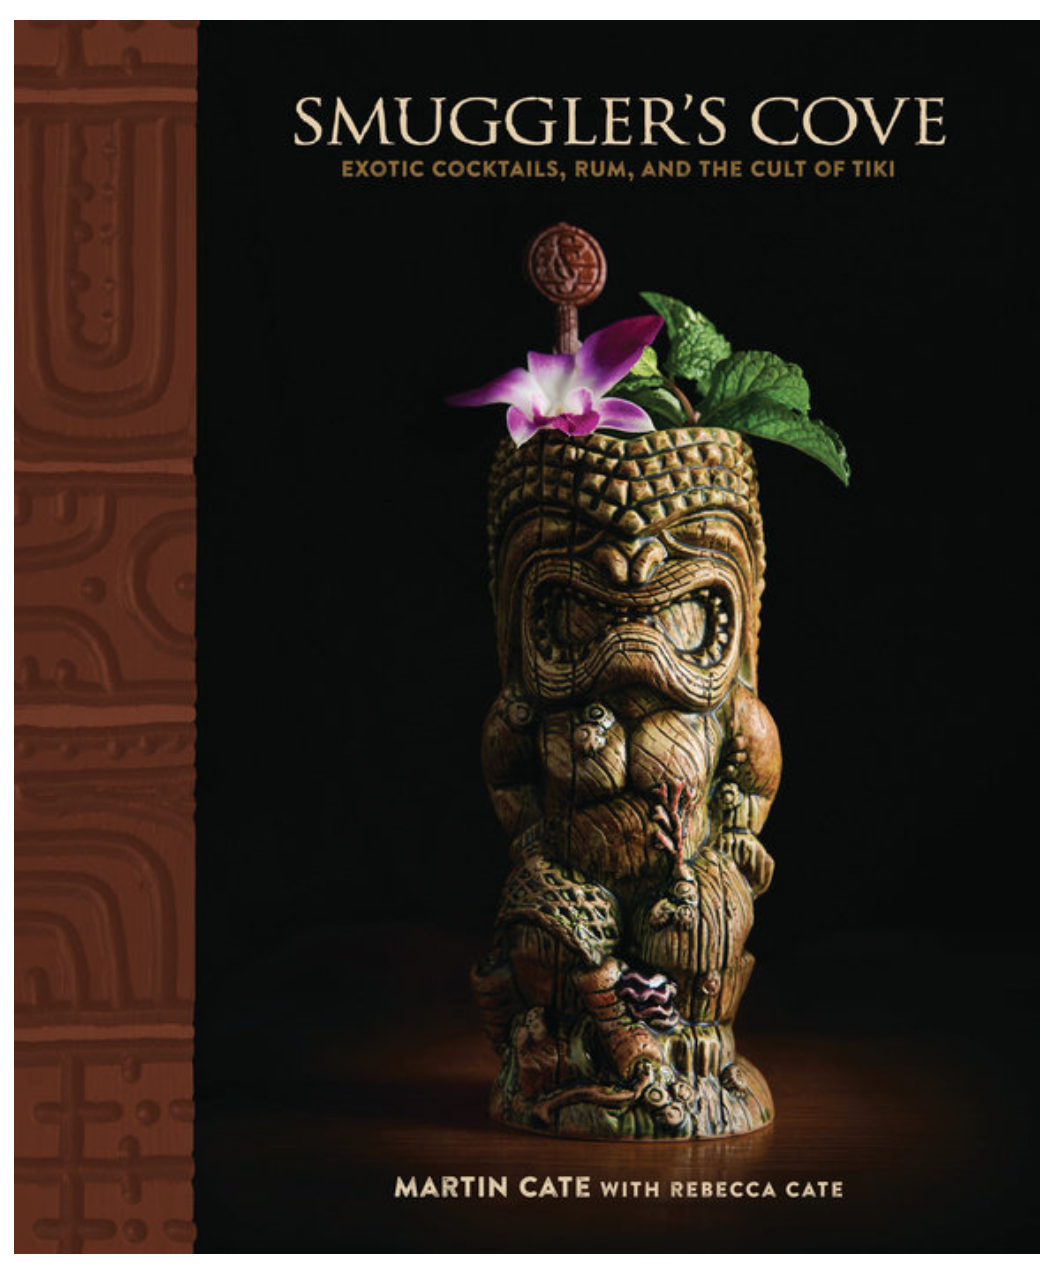 Smuggler's Cove: Exotic Cocktails, Rum and the Cult of Tiki